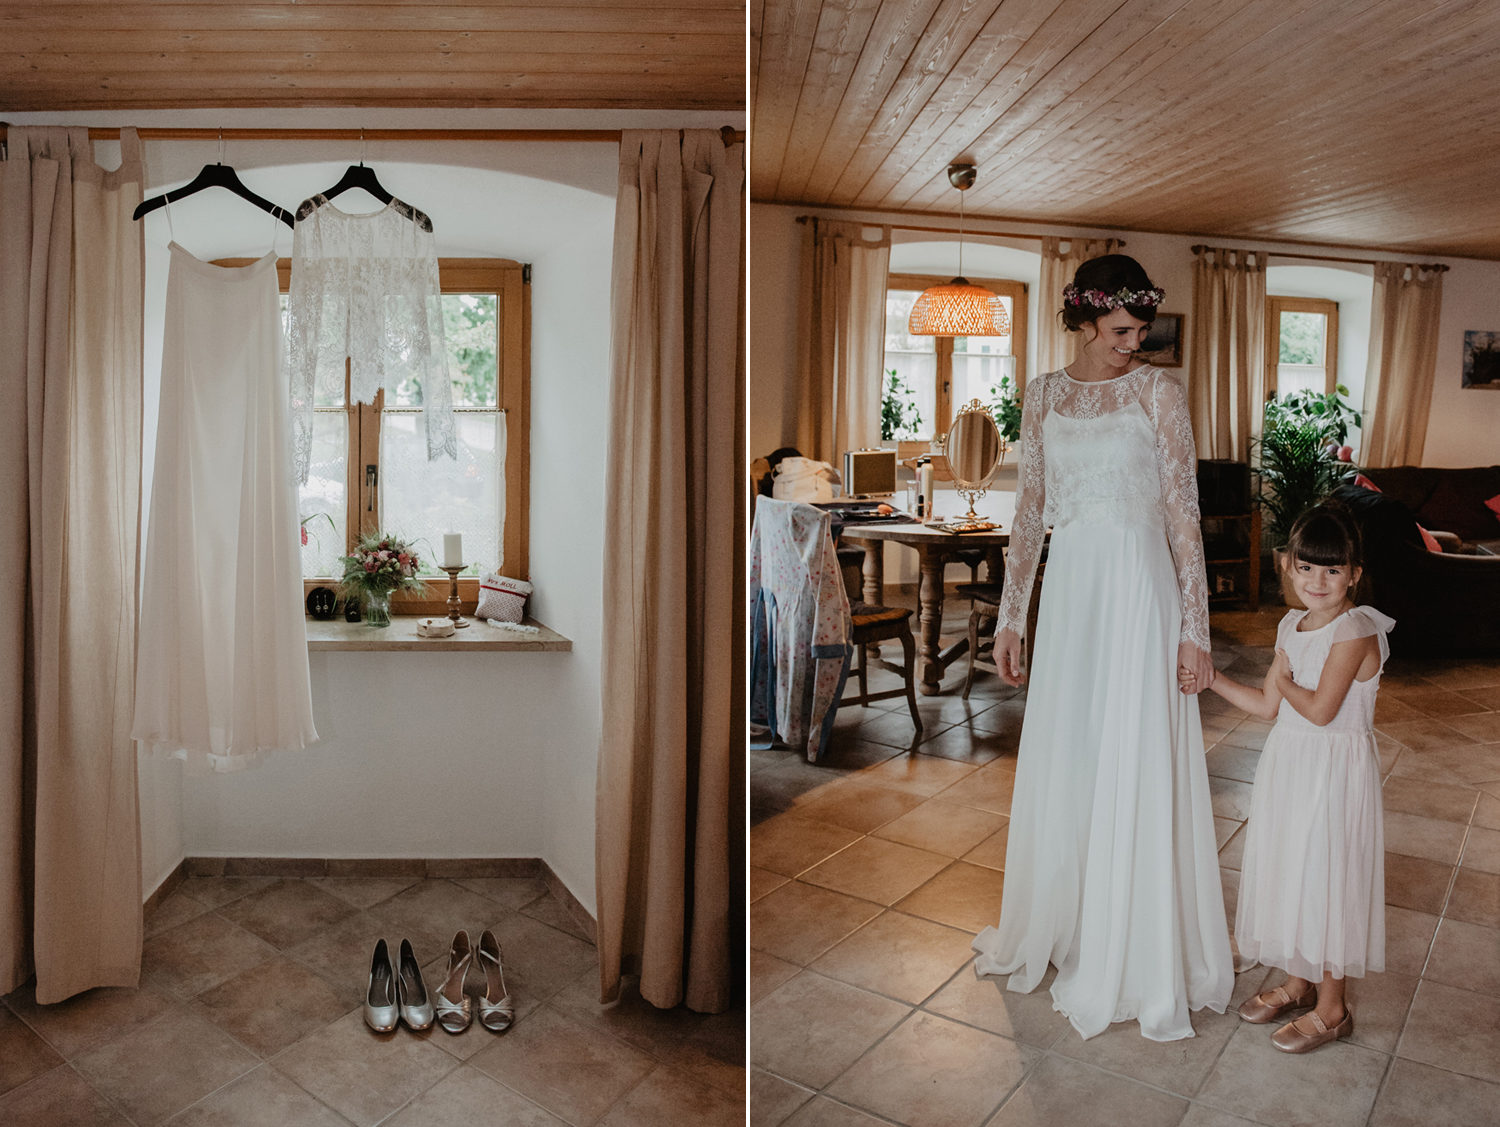 elfenkleid wedding dress and lace top hanging in window in rustic farm kitchen 